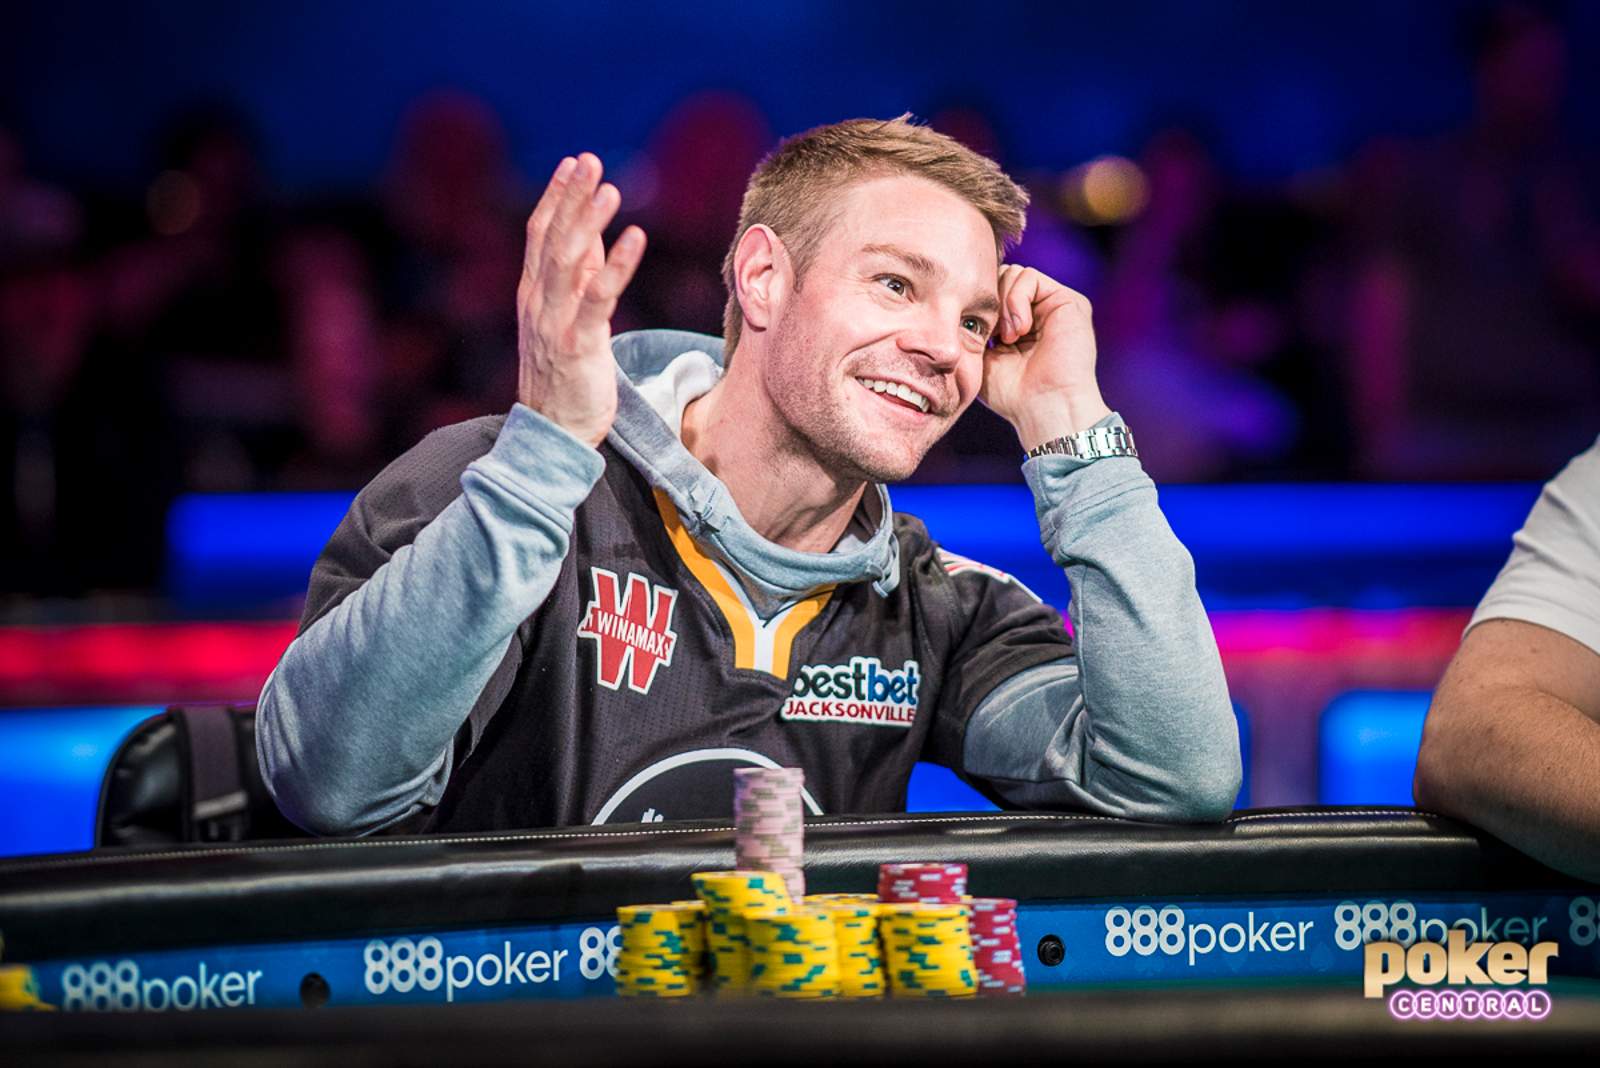 Tony Miles Storms To Main Event Final Table Chip Lead on PokerGO